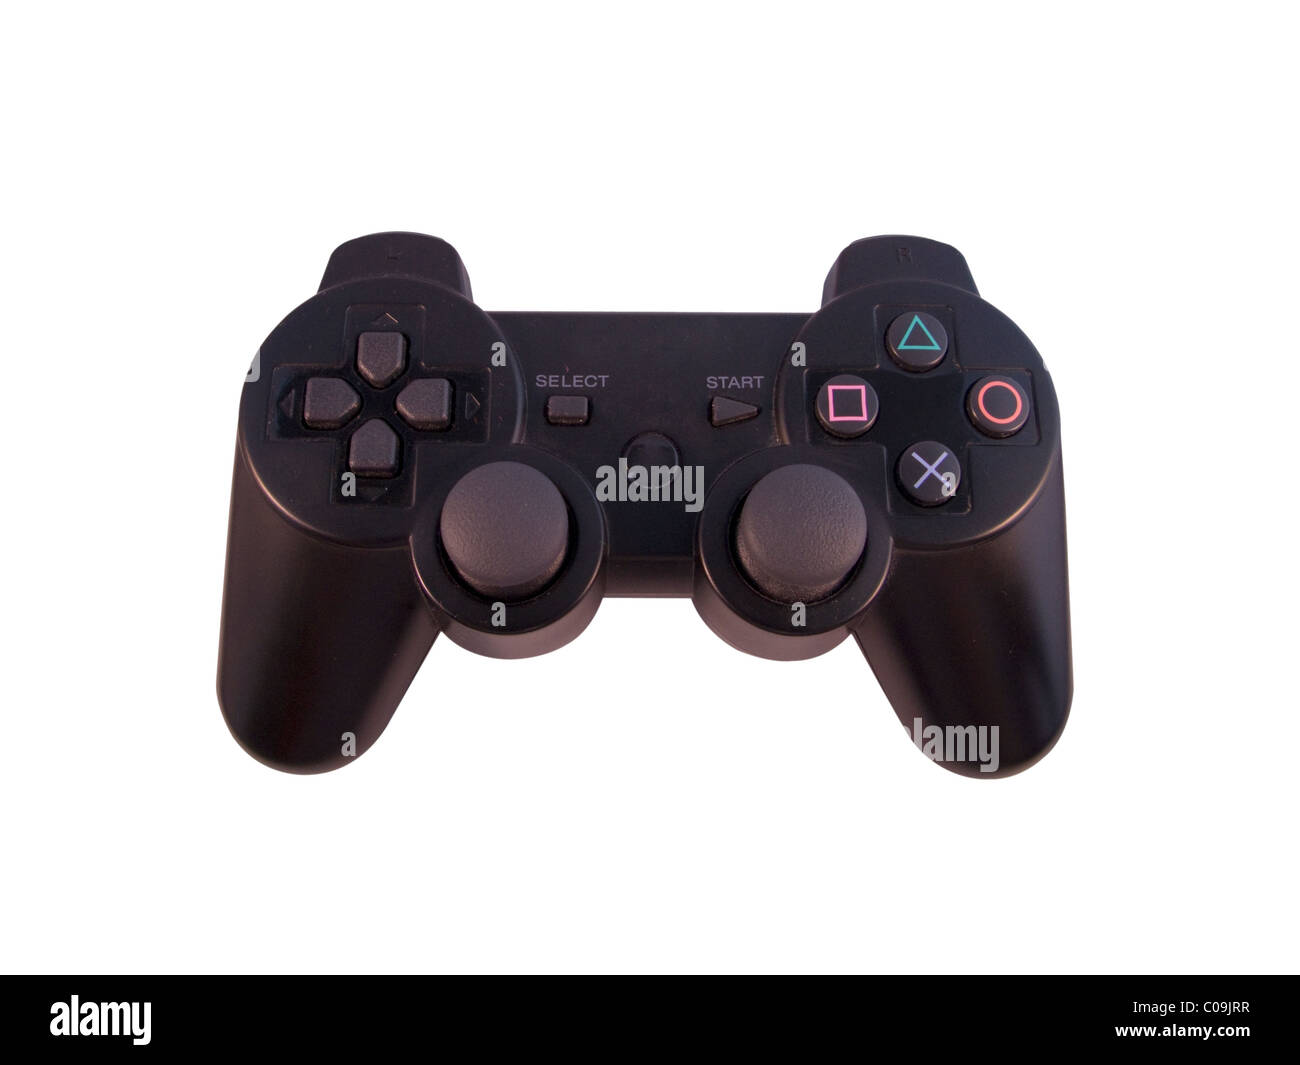 Ps3 Controller High Resolution Stock Photography and Images - Alamy